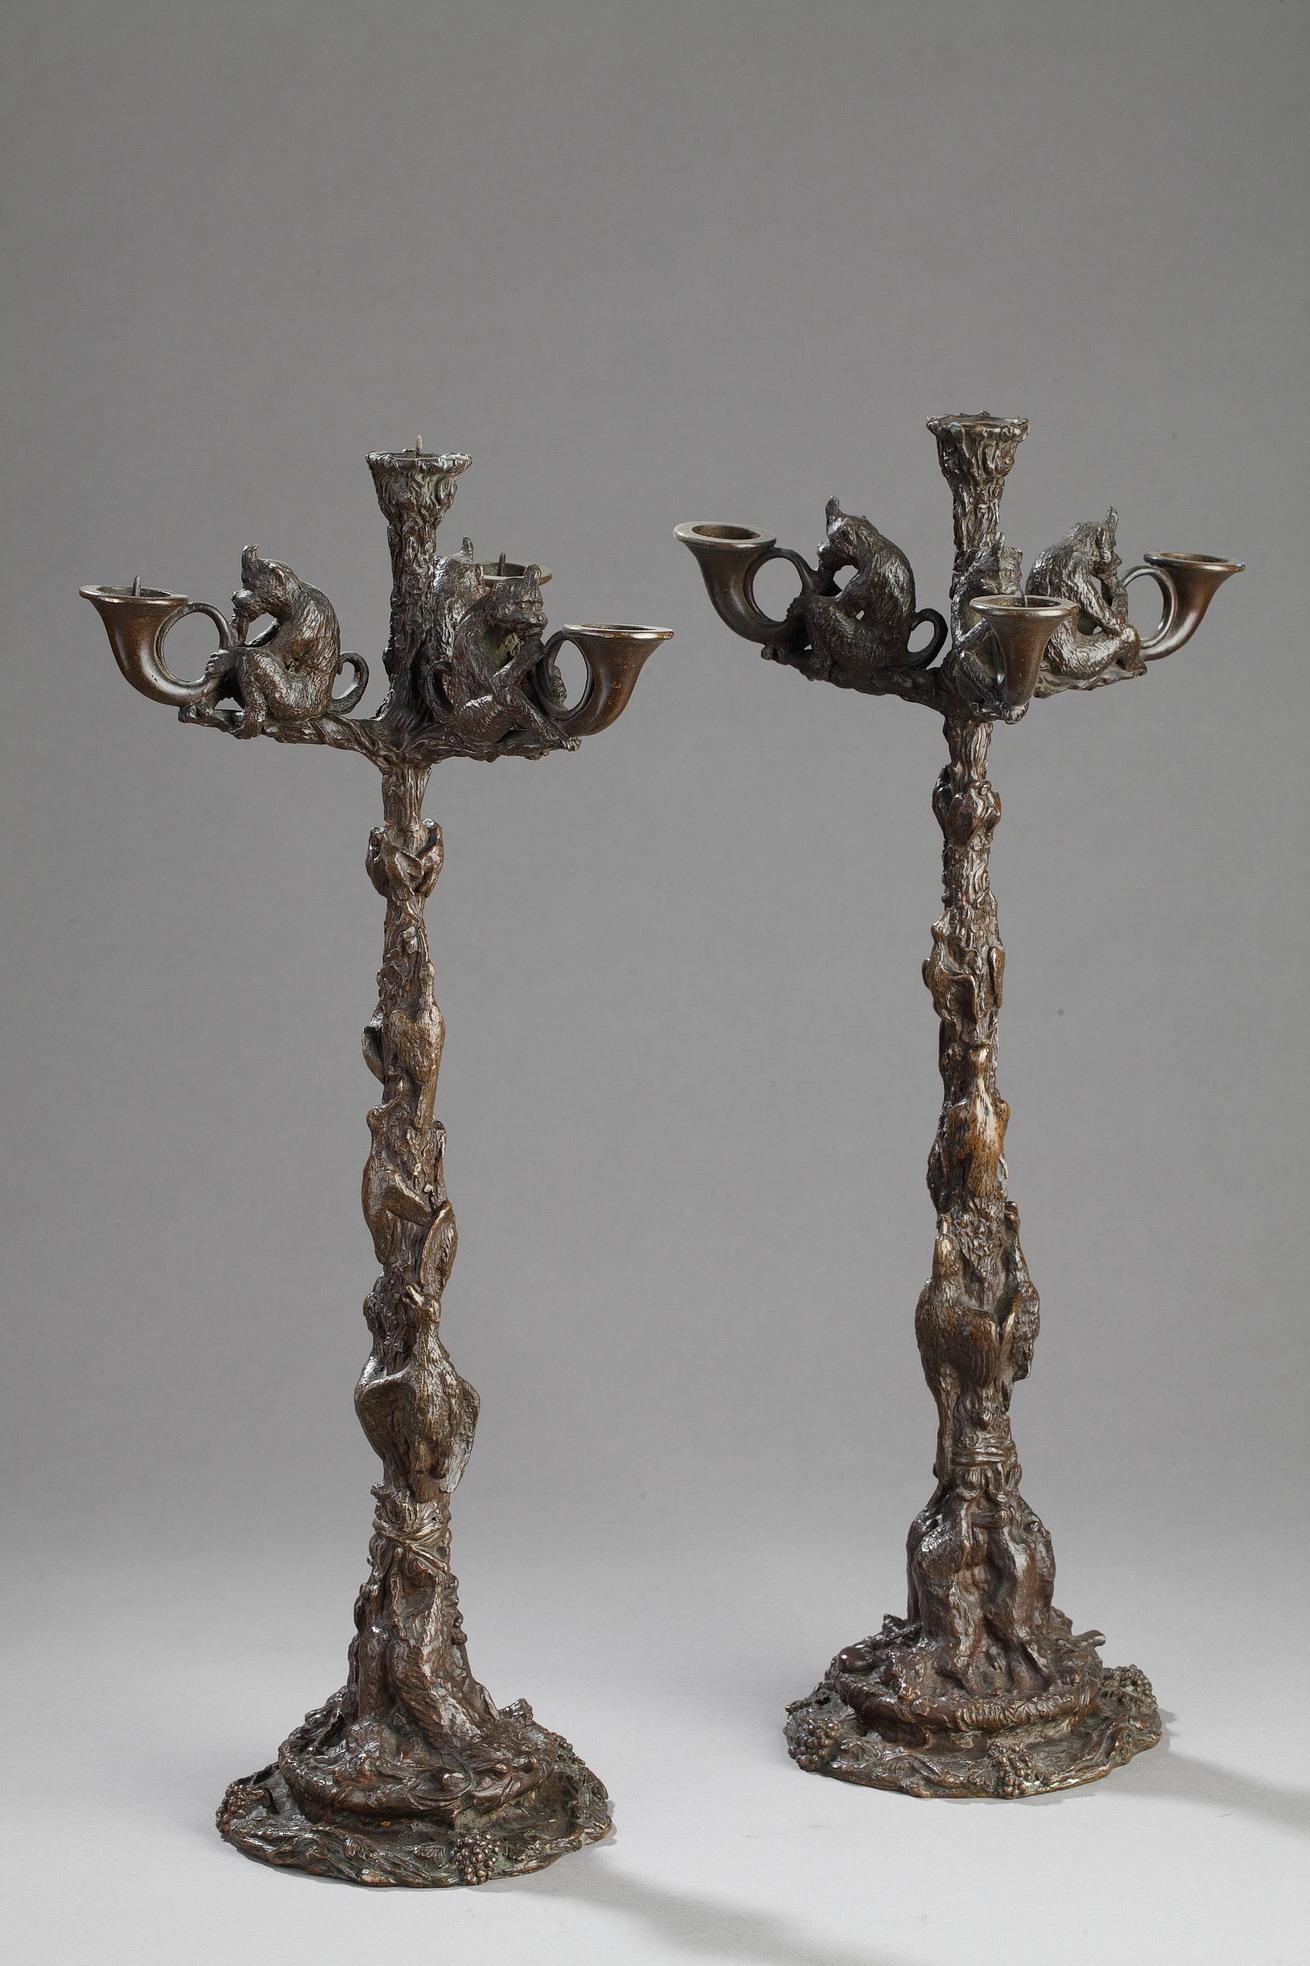 Pair of monkey candelabras - Sculpture by Christopher Fratin